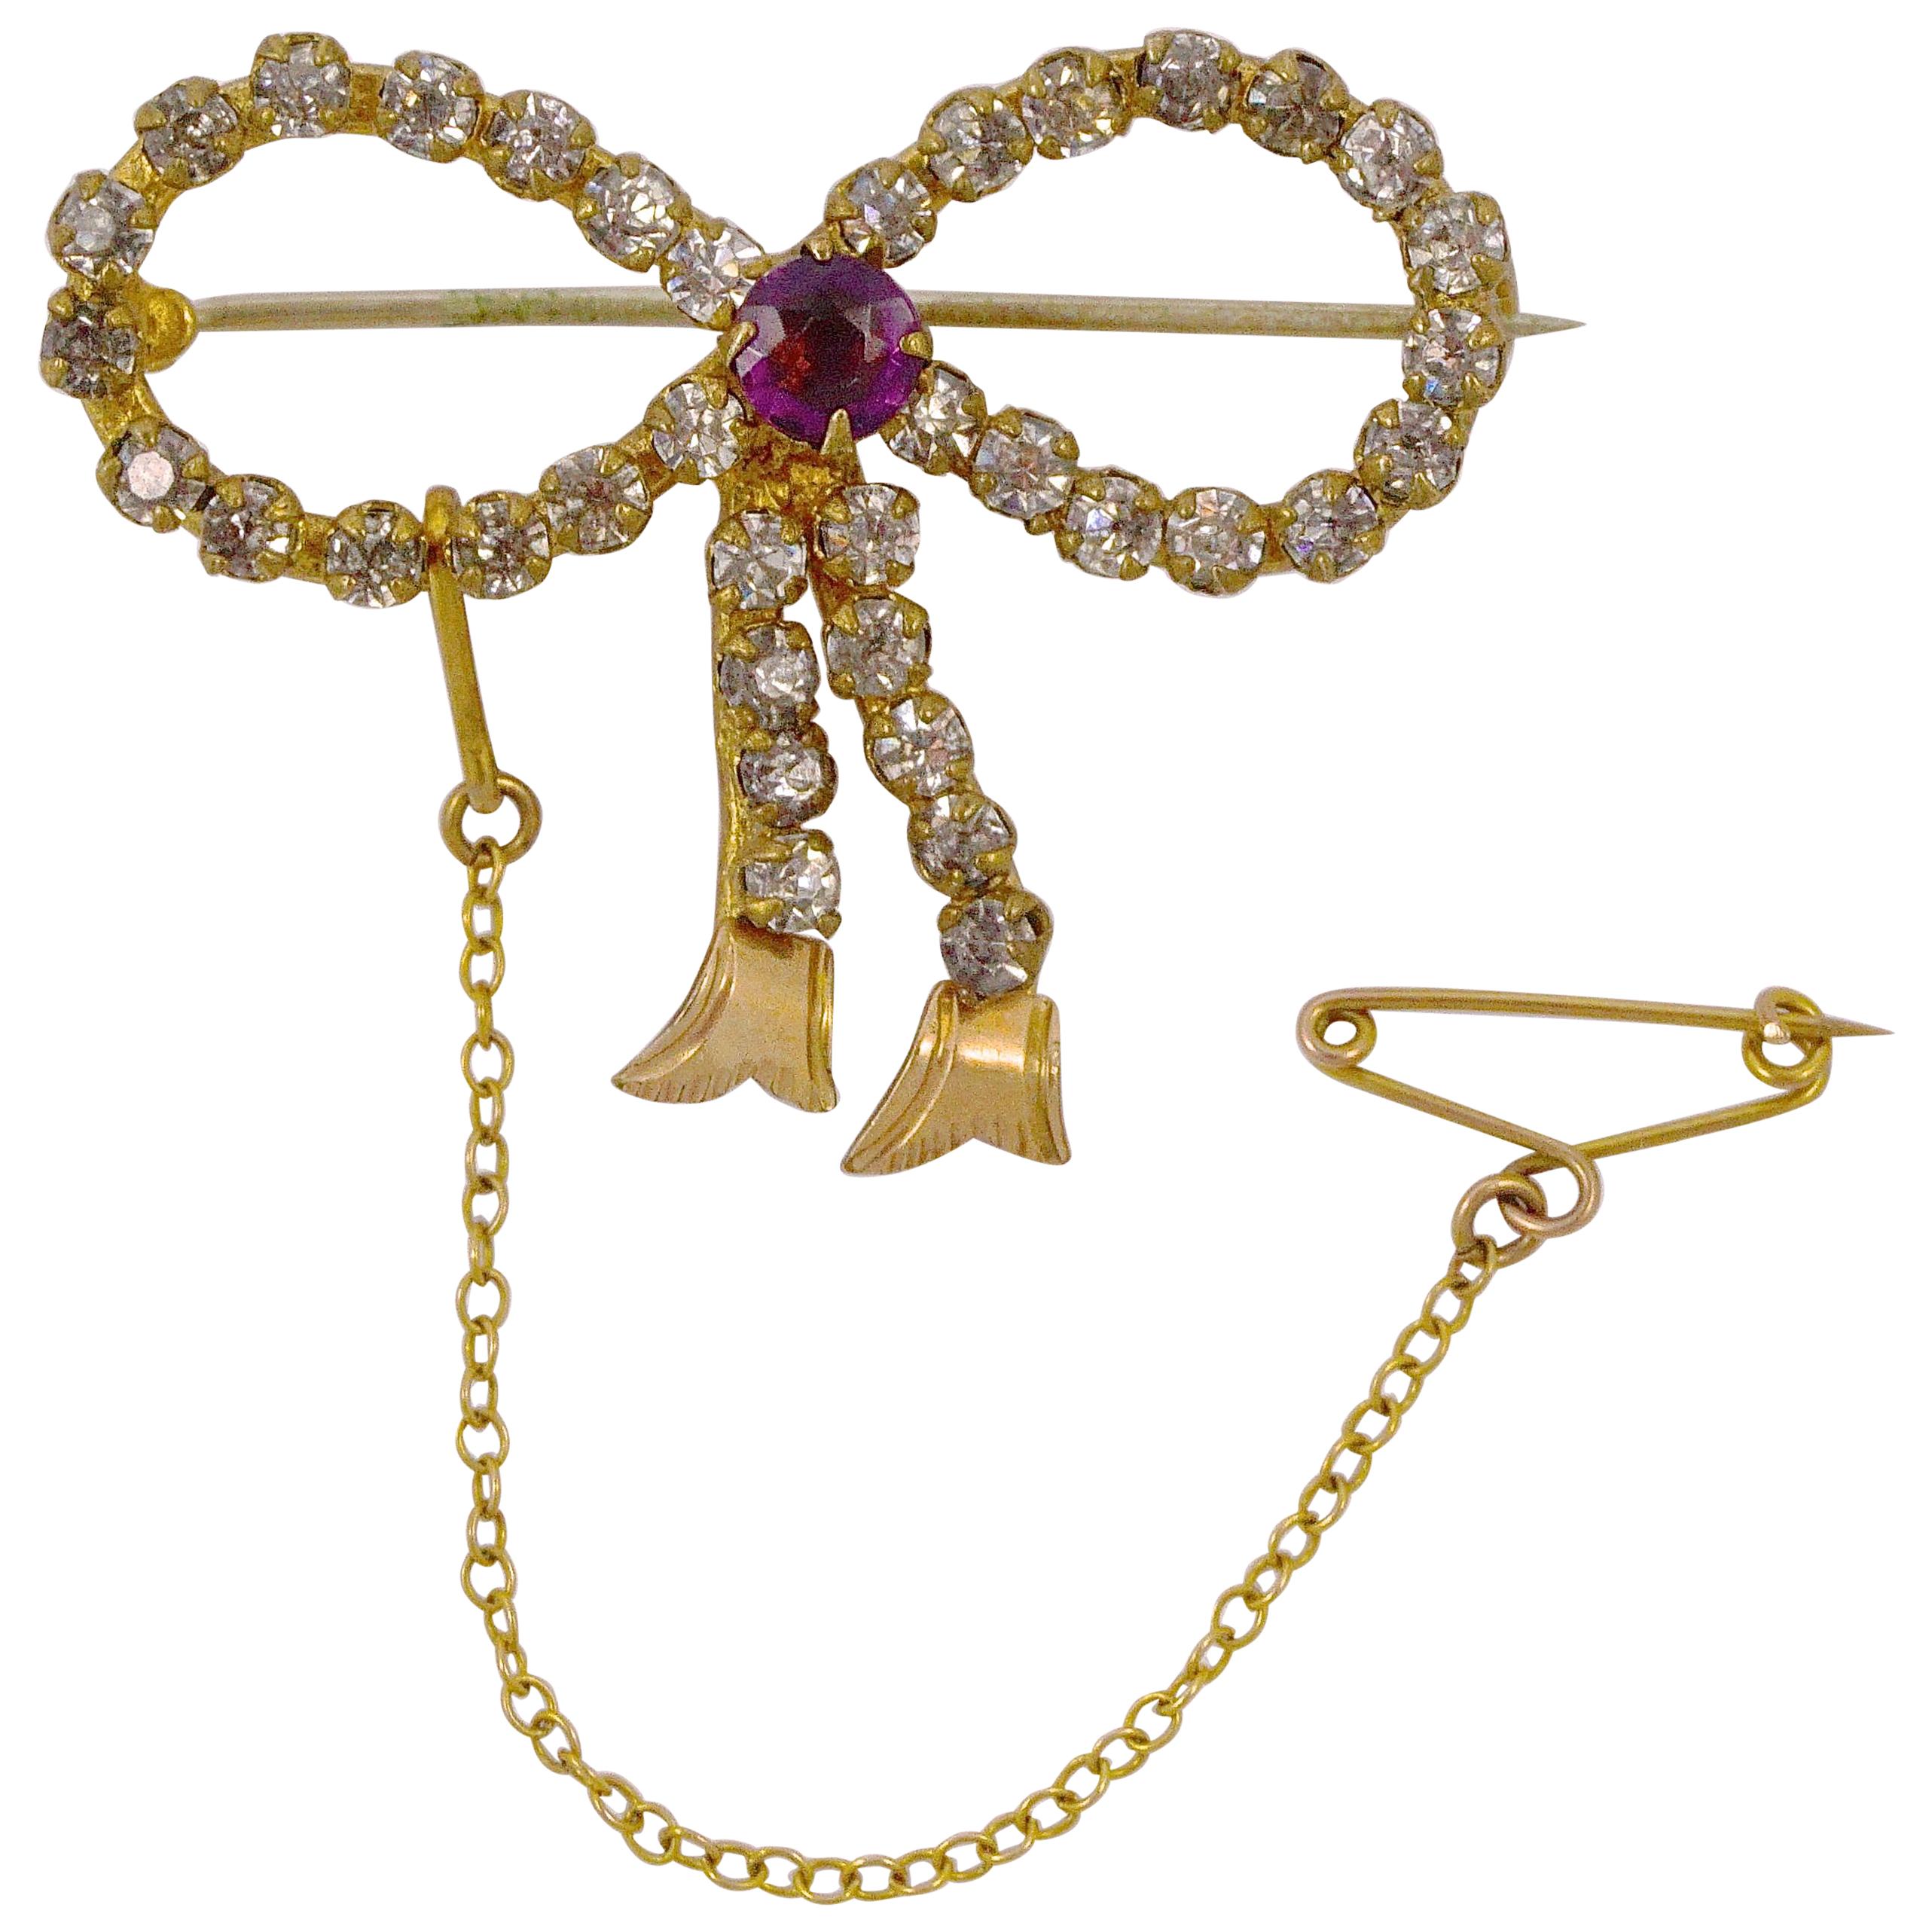 Antique Gold Tone Amethyst and Clear Paste Bow Brooch circa 1910 For Sale